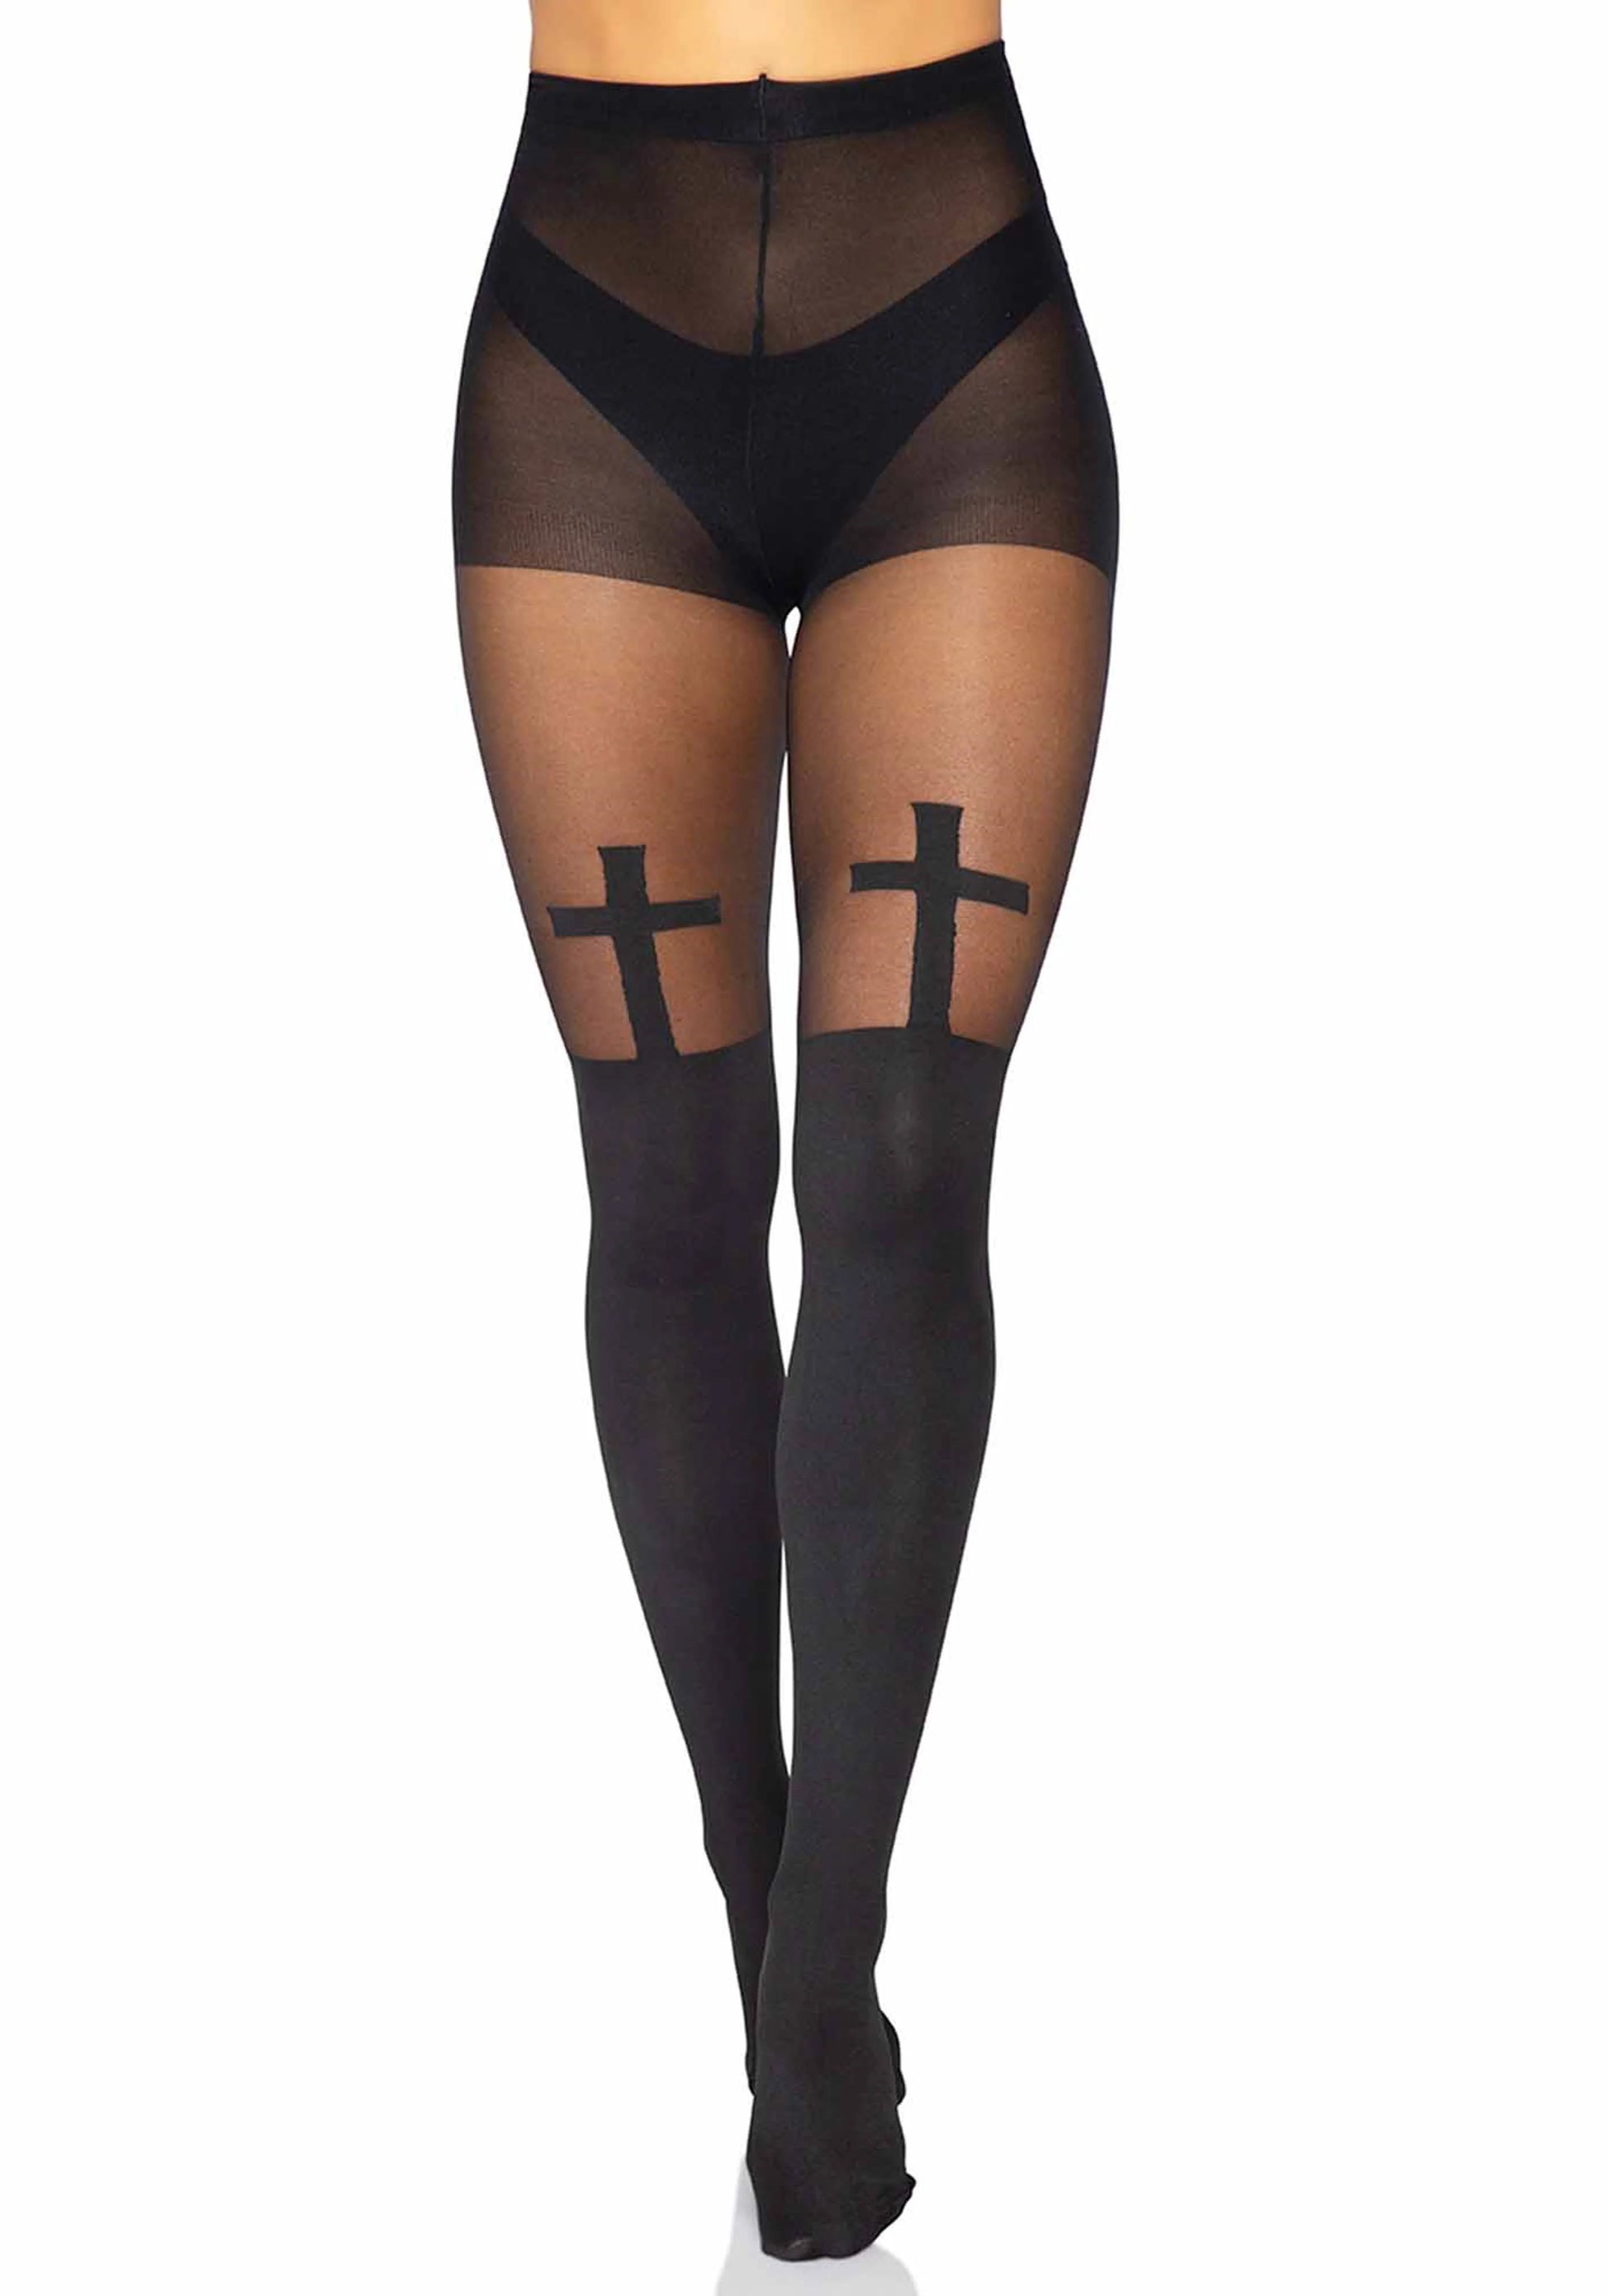 Leg Avenue 7903 Bless Me Cross Tights - Black sheer tights with an opaque over the knee effect sock with a cross design on the front.